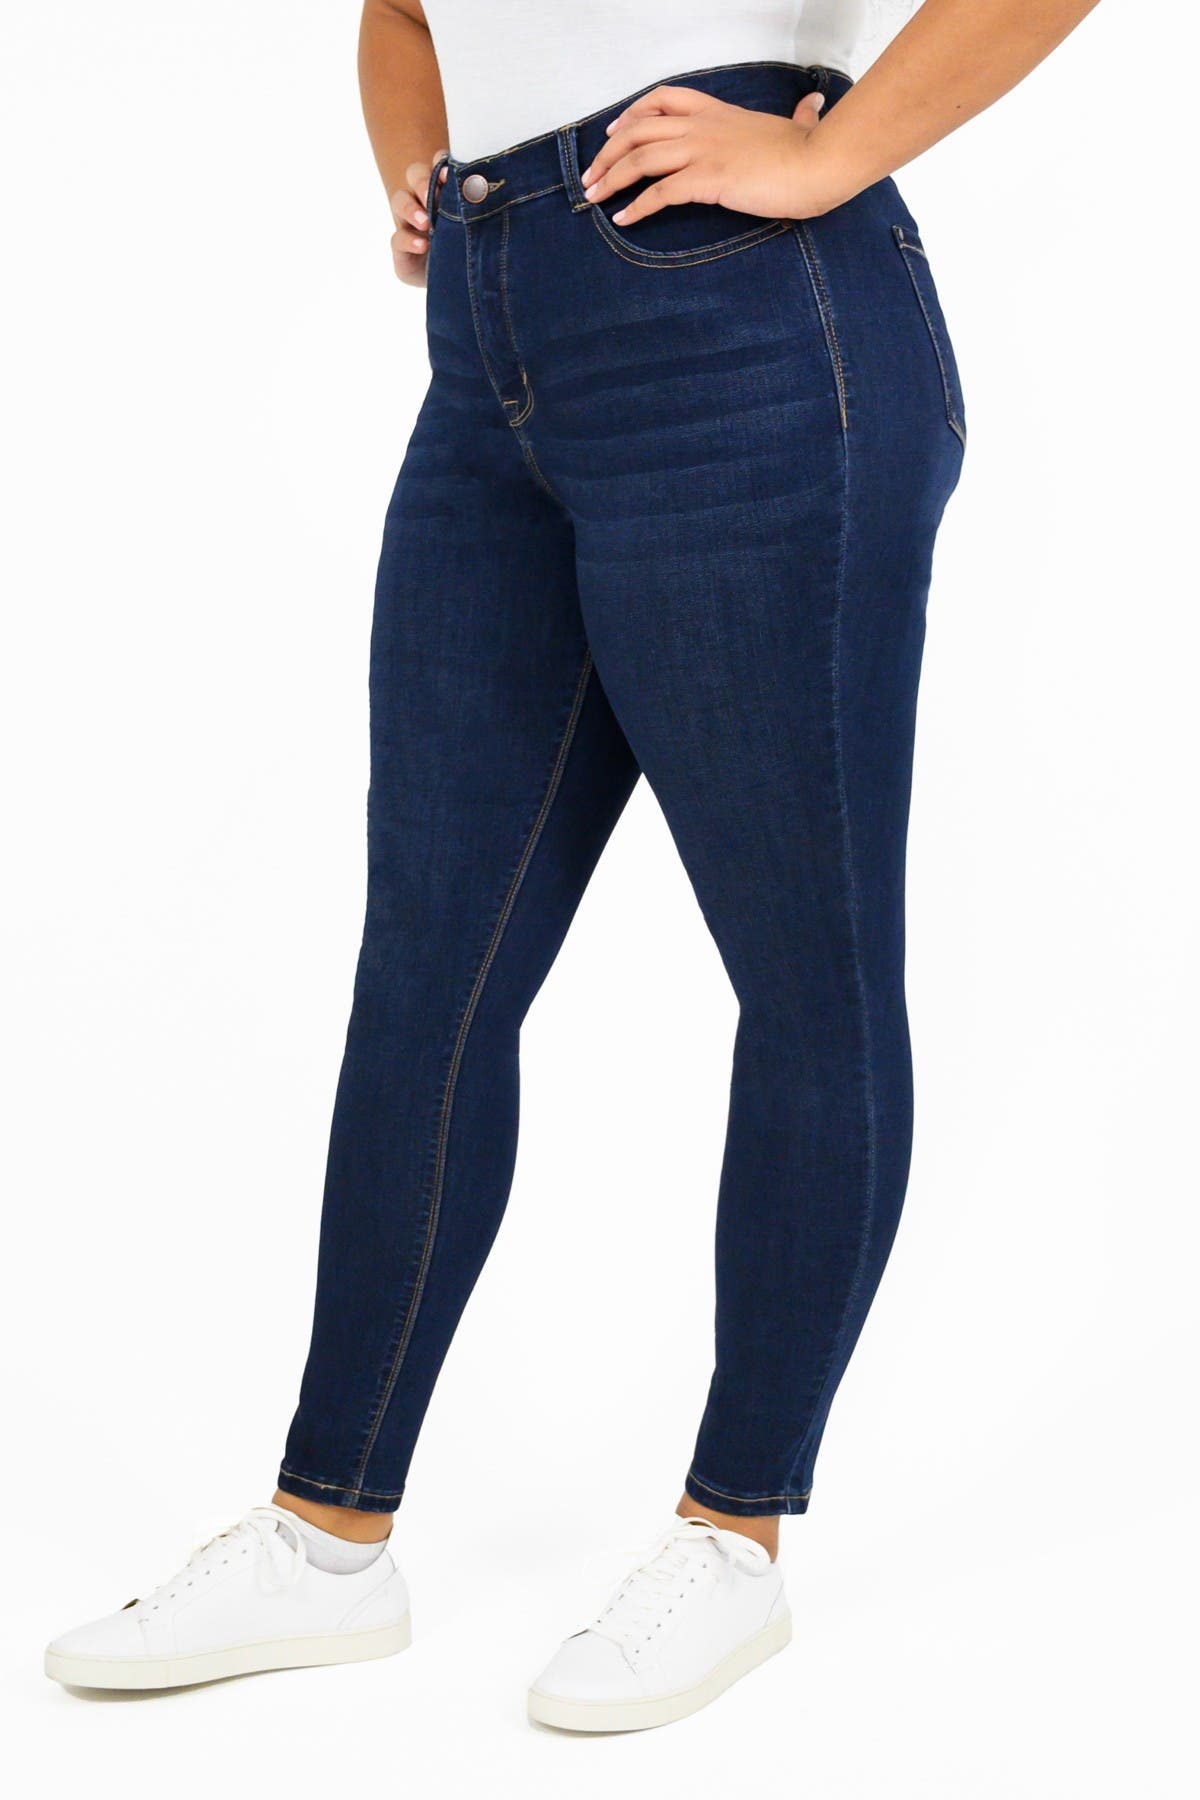 curve appeal skinny jeans